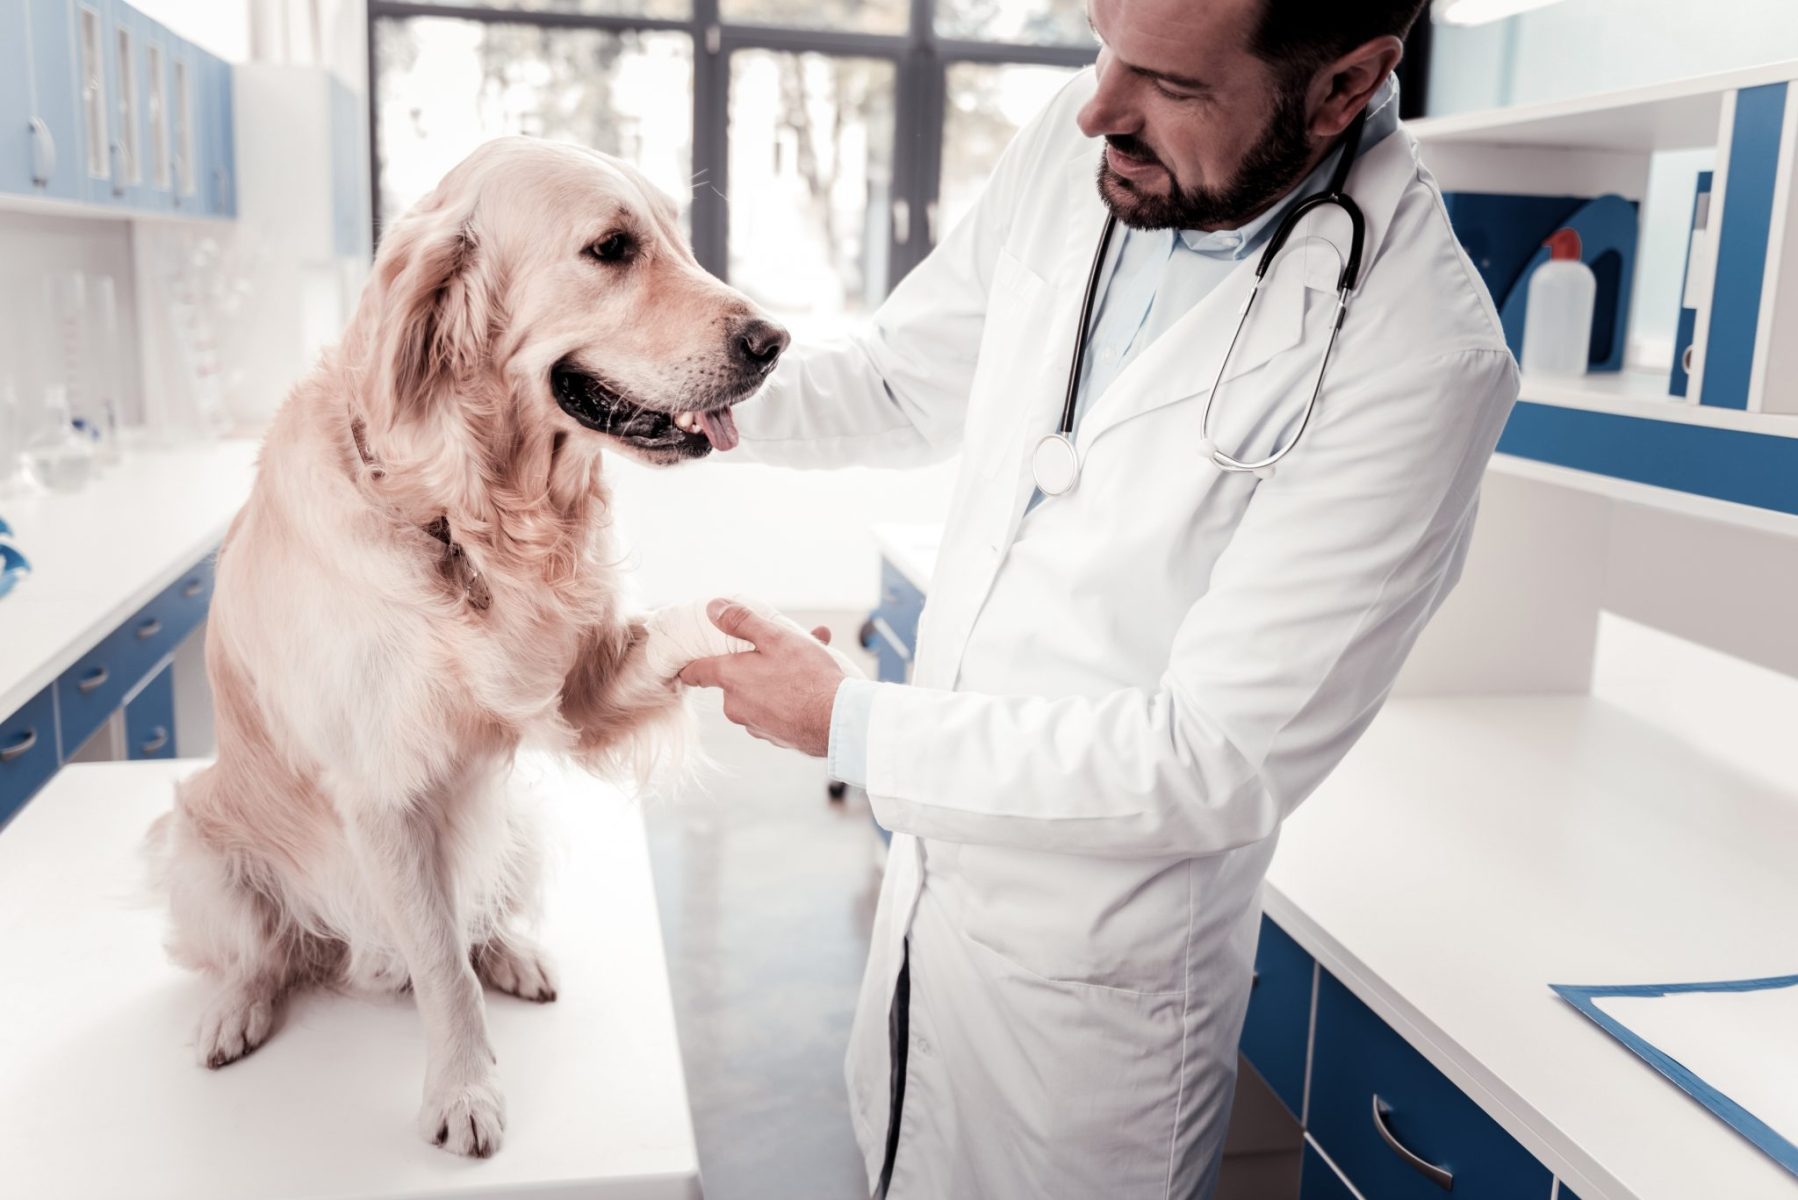 How to Find A Good Vet for Your Pup